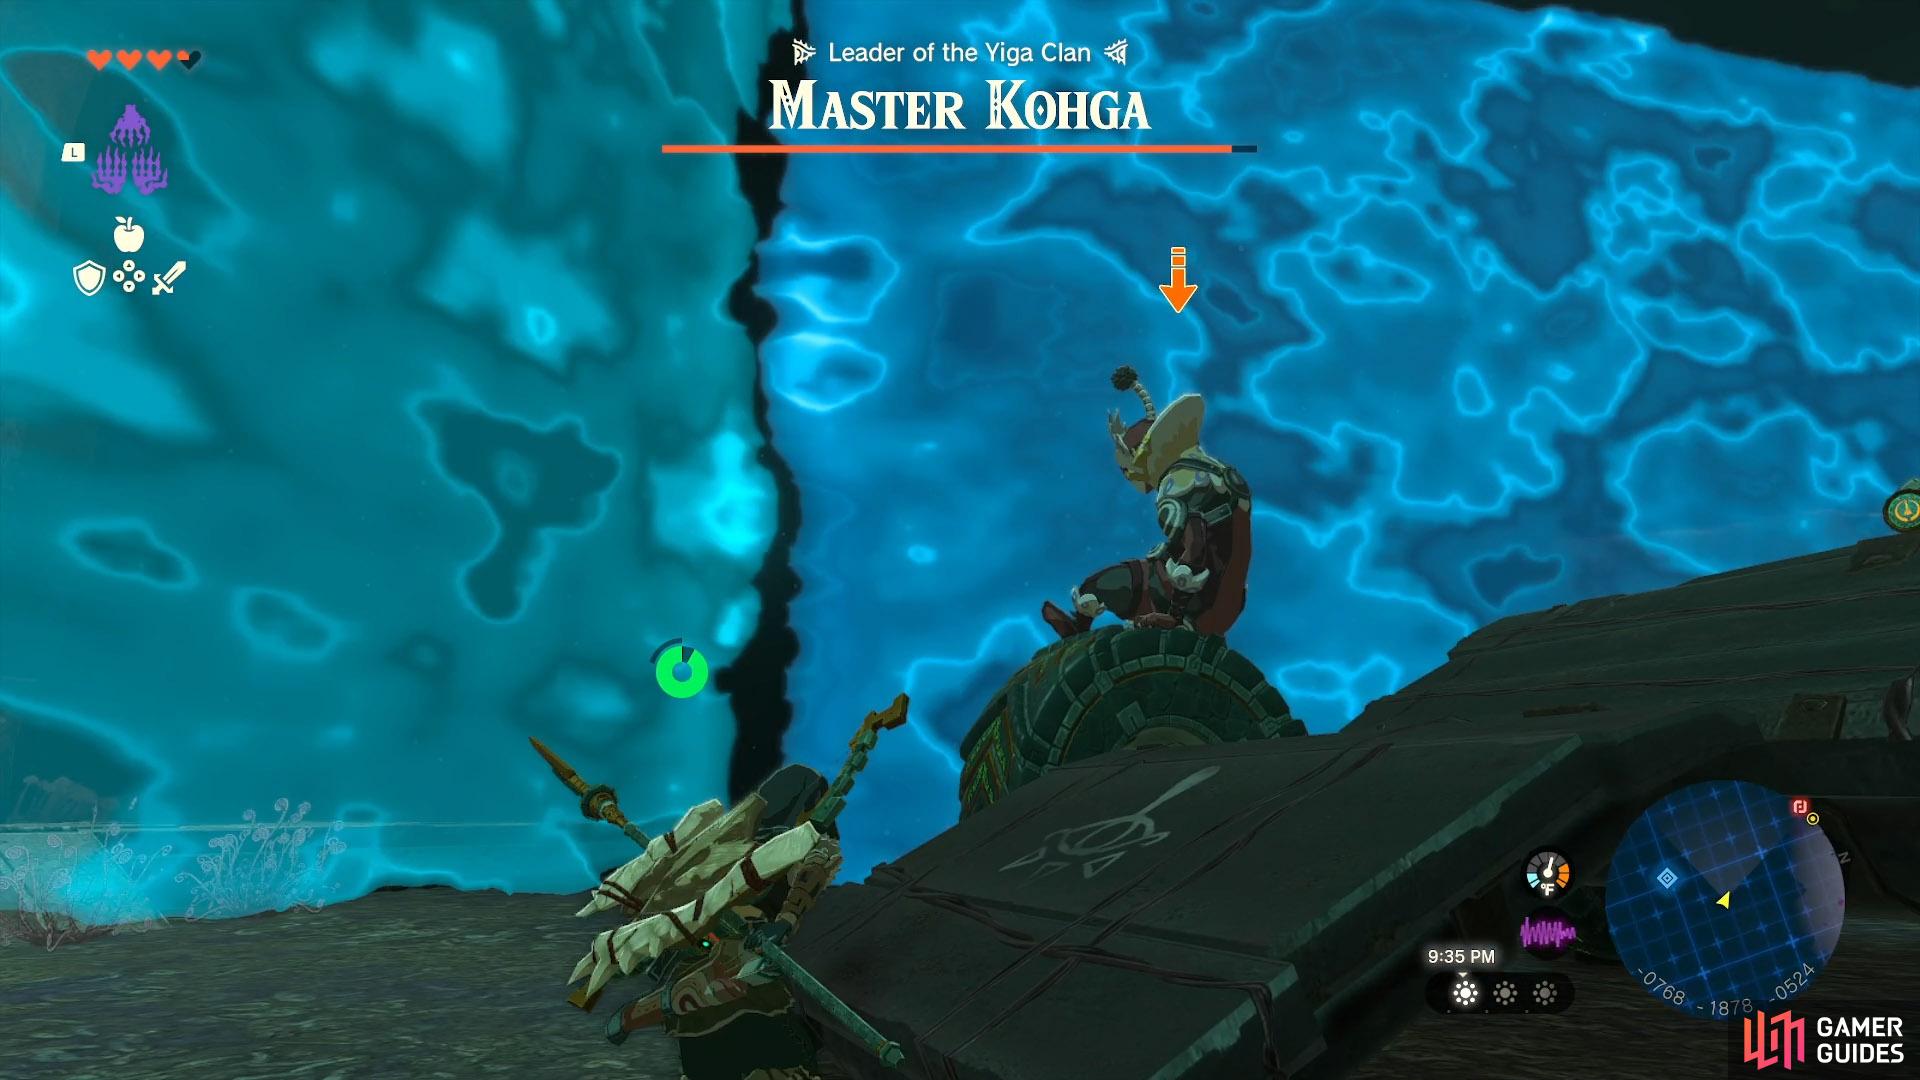 Master Kohga stunned after receiving a hit from an arrow